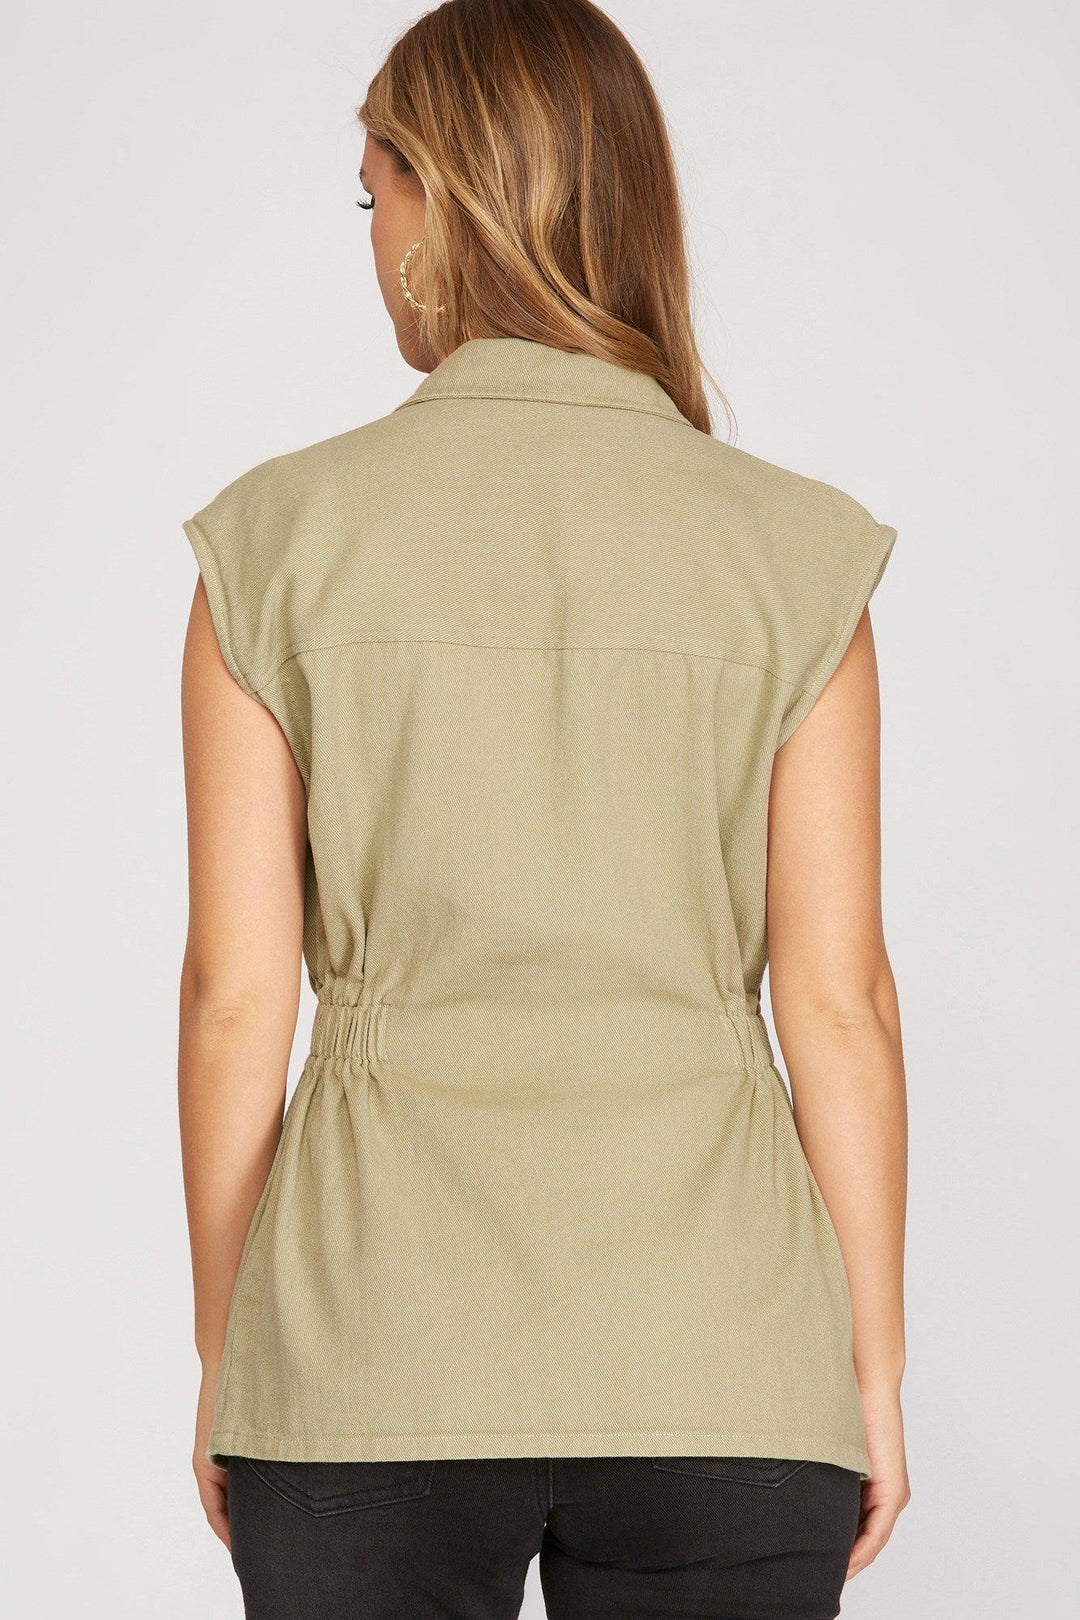 trendy womens boutique online store olive green